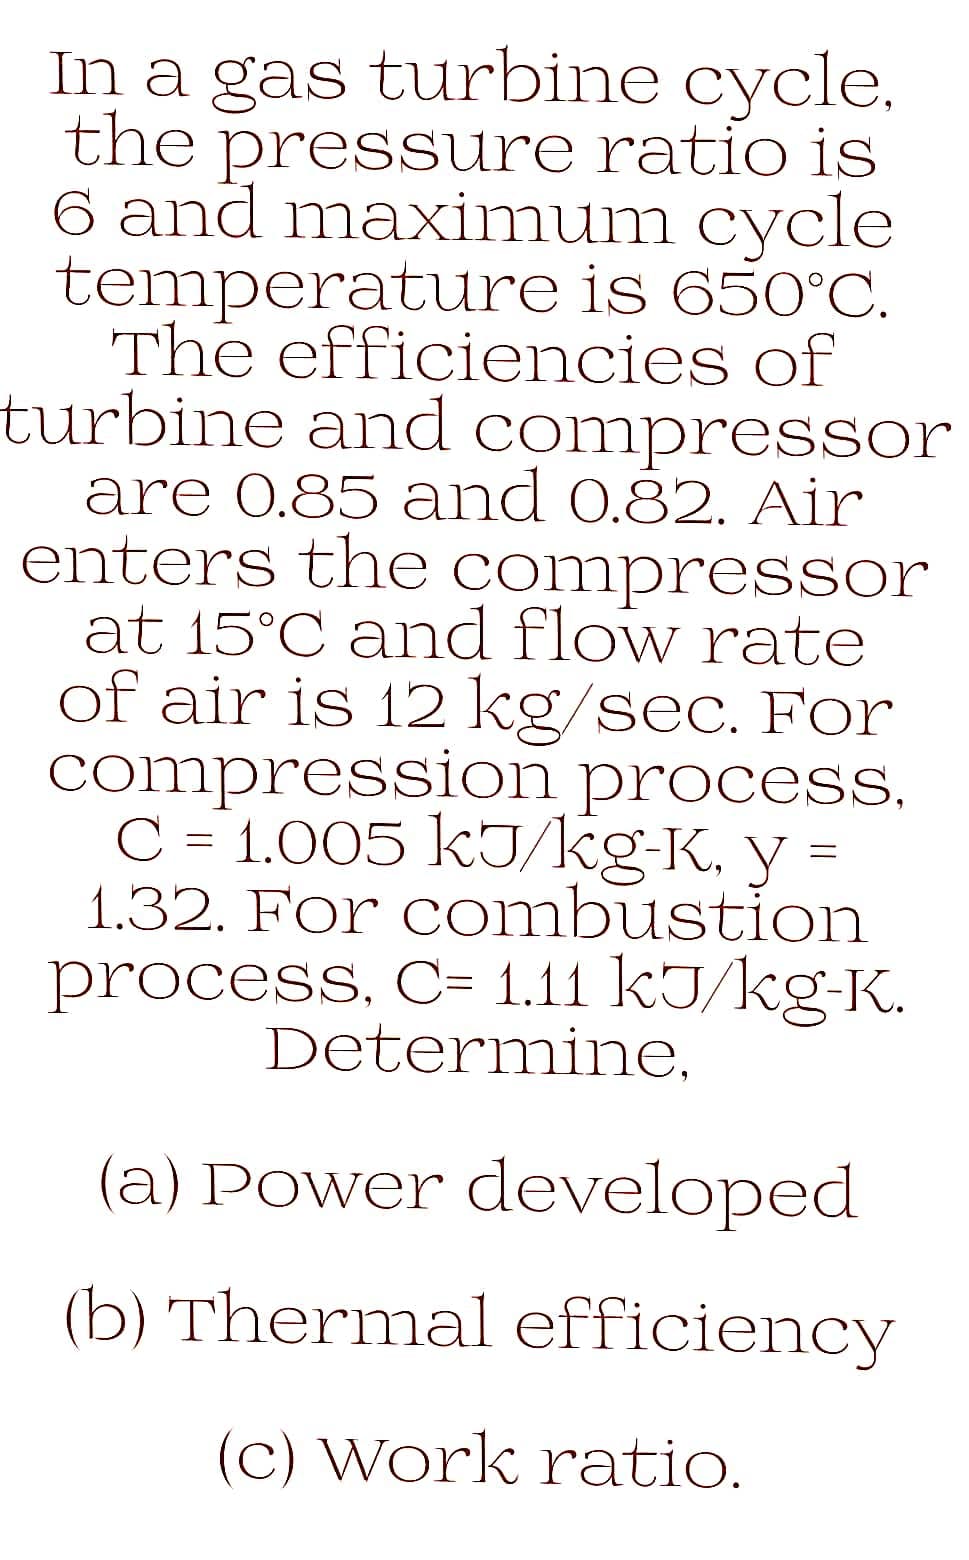 In a gas turbine cycle.
the pressure ratio is
6 and maximum cycle
temperature is 650°C.
The efficiencies of
turbine and compressor
are 0.85 and 0.82. Air
enters the compressor
at 15°C and flow rate
of air is 12 kg/sec. For
compression process.
C = 1.005 kJ/kg-K. y
1.32. For combustion
process, C= 1.11 kJ/kg-K.
Determine,
(a) Power developed
(b) Thermal efficiency
(c) Work ratio.
